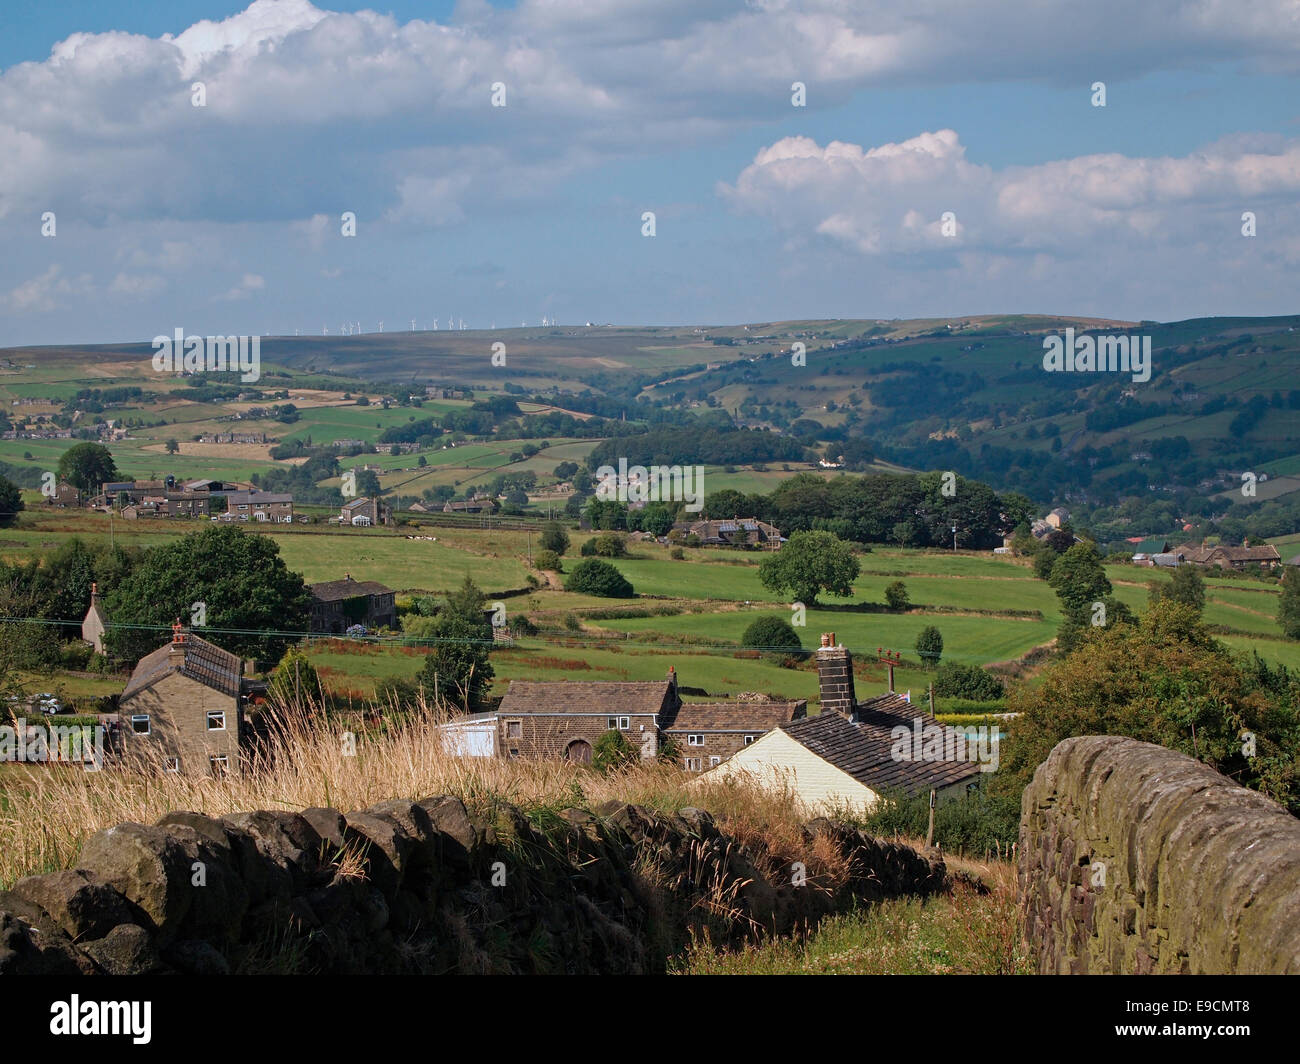 View looking north from Sowerby over the Calder Valley towards Luddenden and the moors beyond, Calderdale, West Yorkshire. Stock Photo